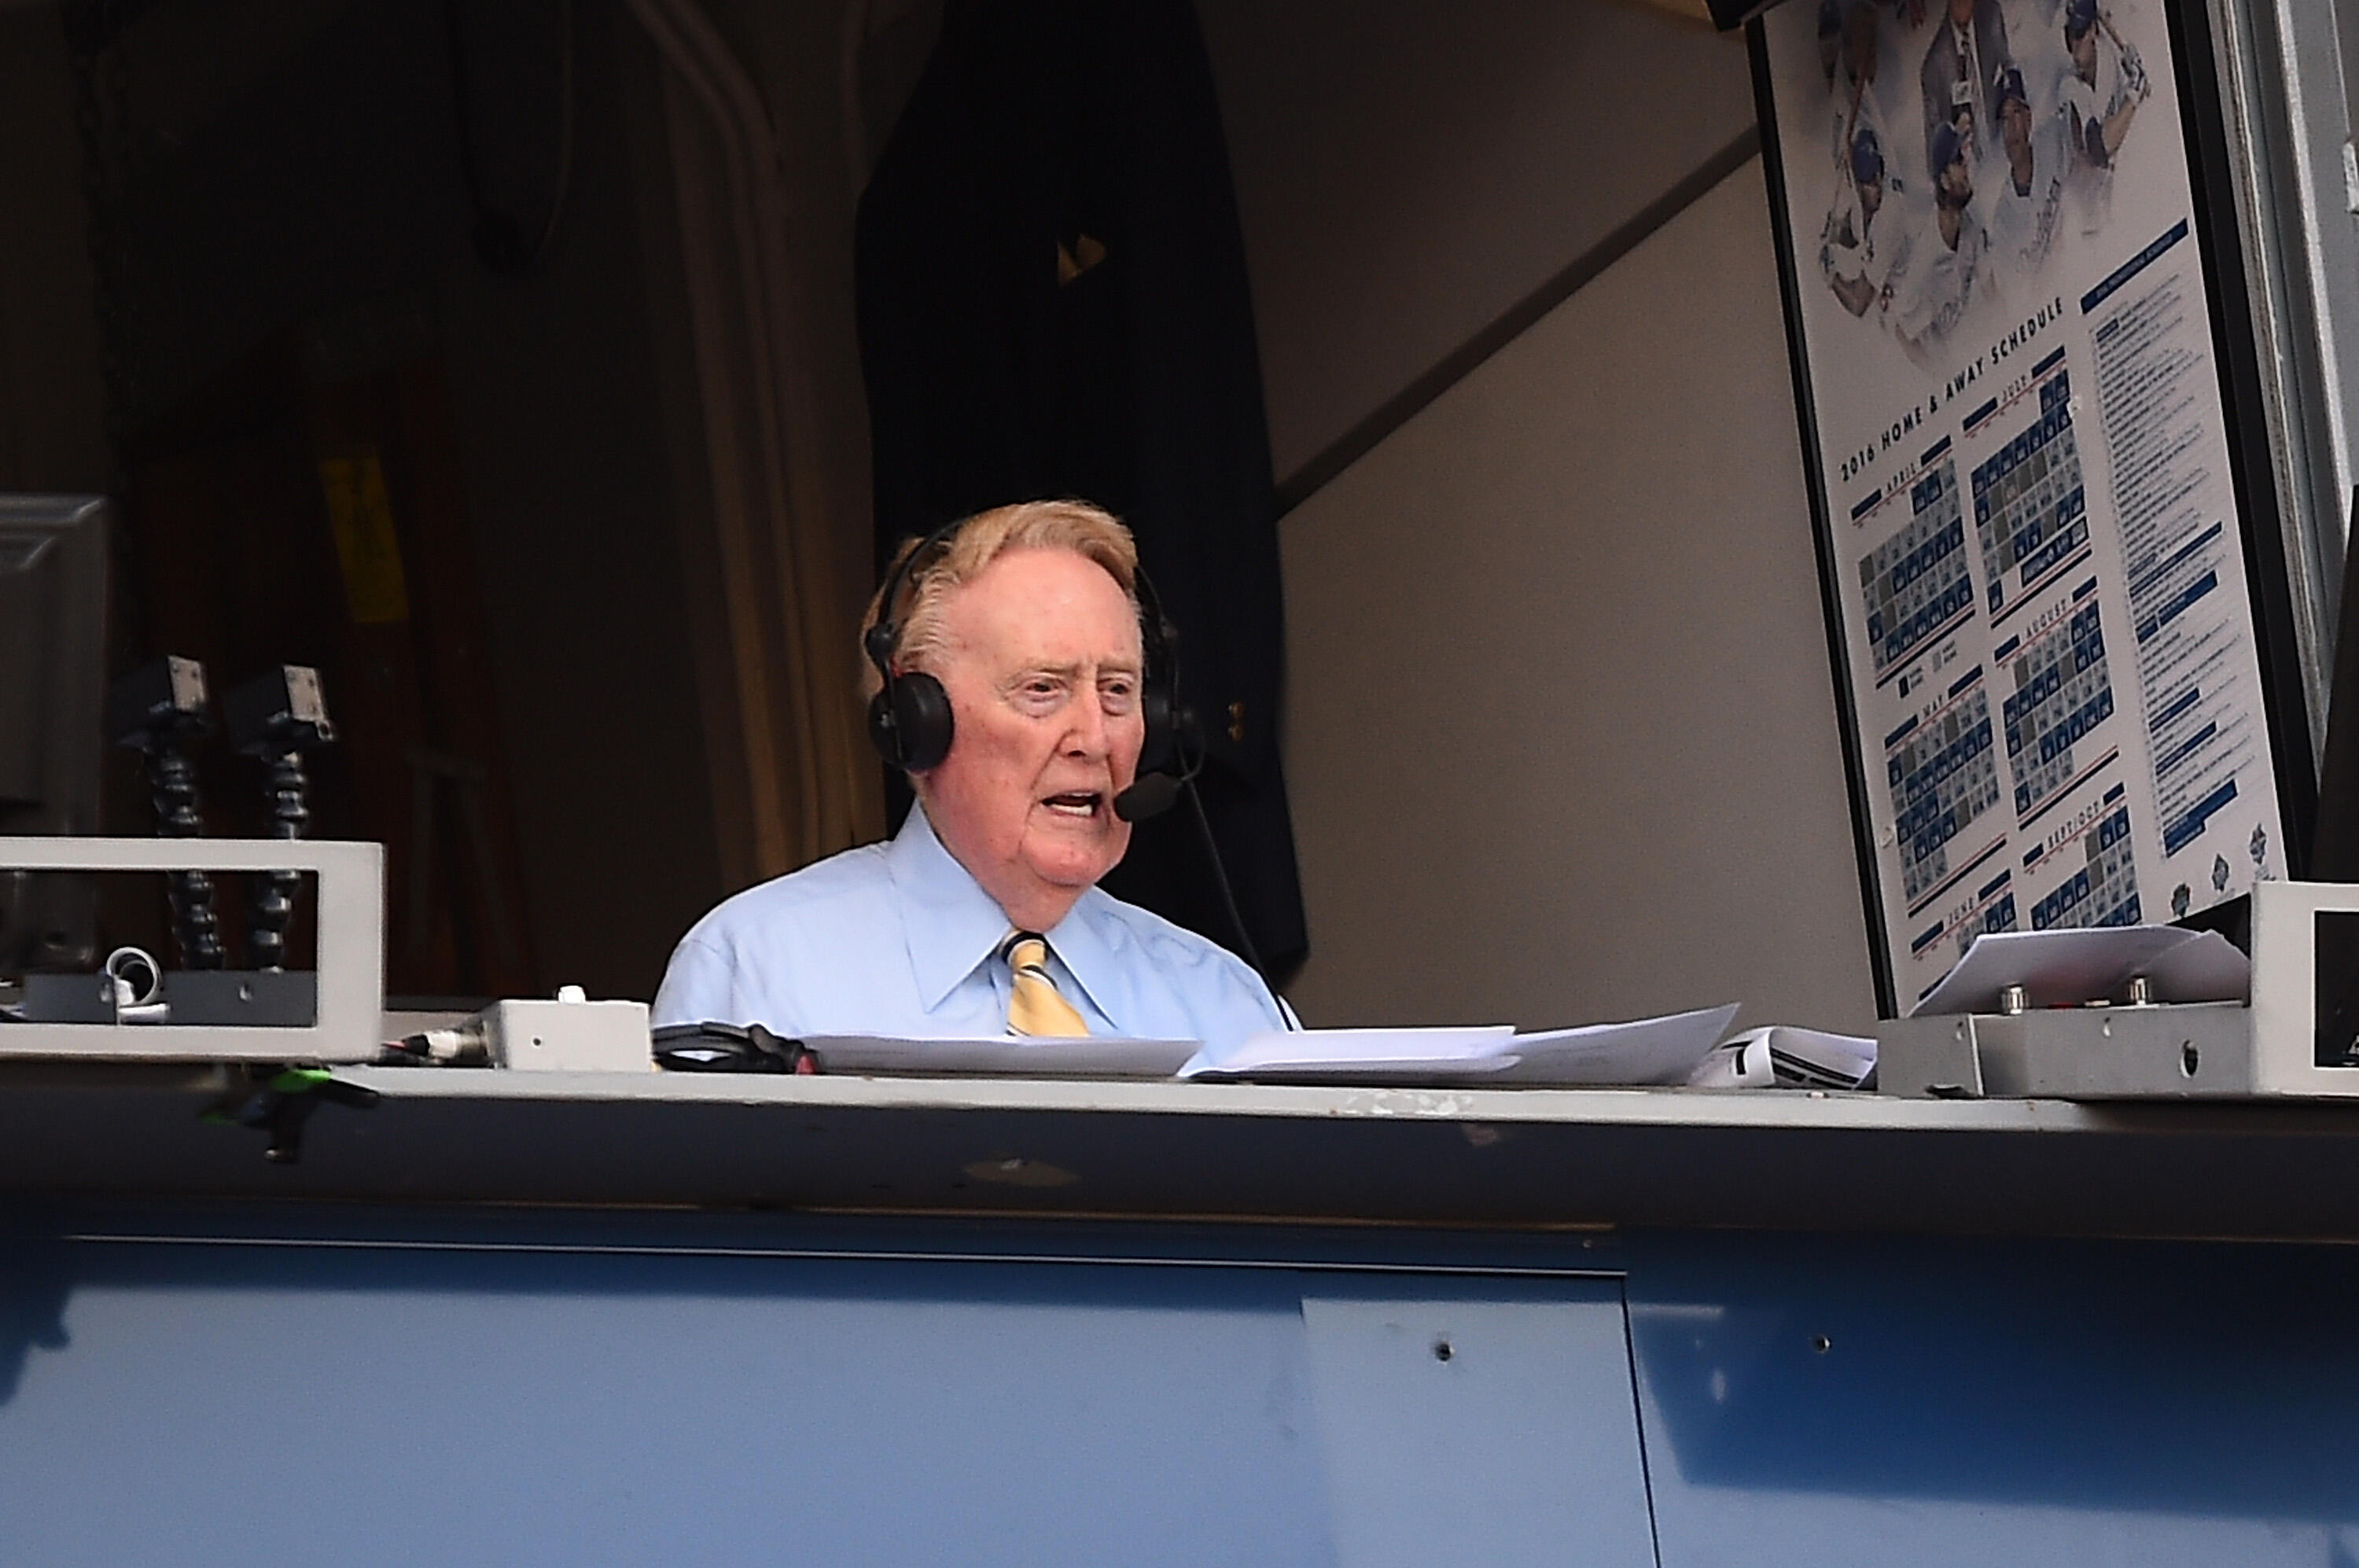 LOS ANGELES, CA - JULY 1:    Los Angeles Dodgers broadcaster Vin Scully announces the game against the Colorado Rockies at Dodger Stadium on July 1, 2016 in Los Angeles, California. (Photo by Jayne Kamin-Oncea/Getty Images.)